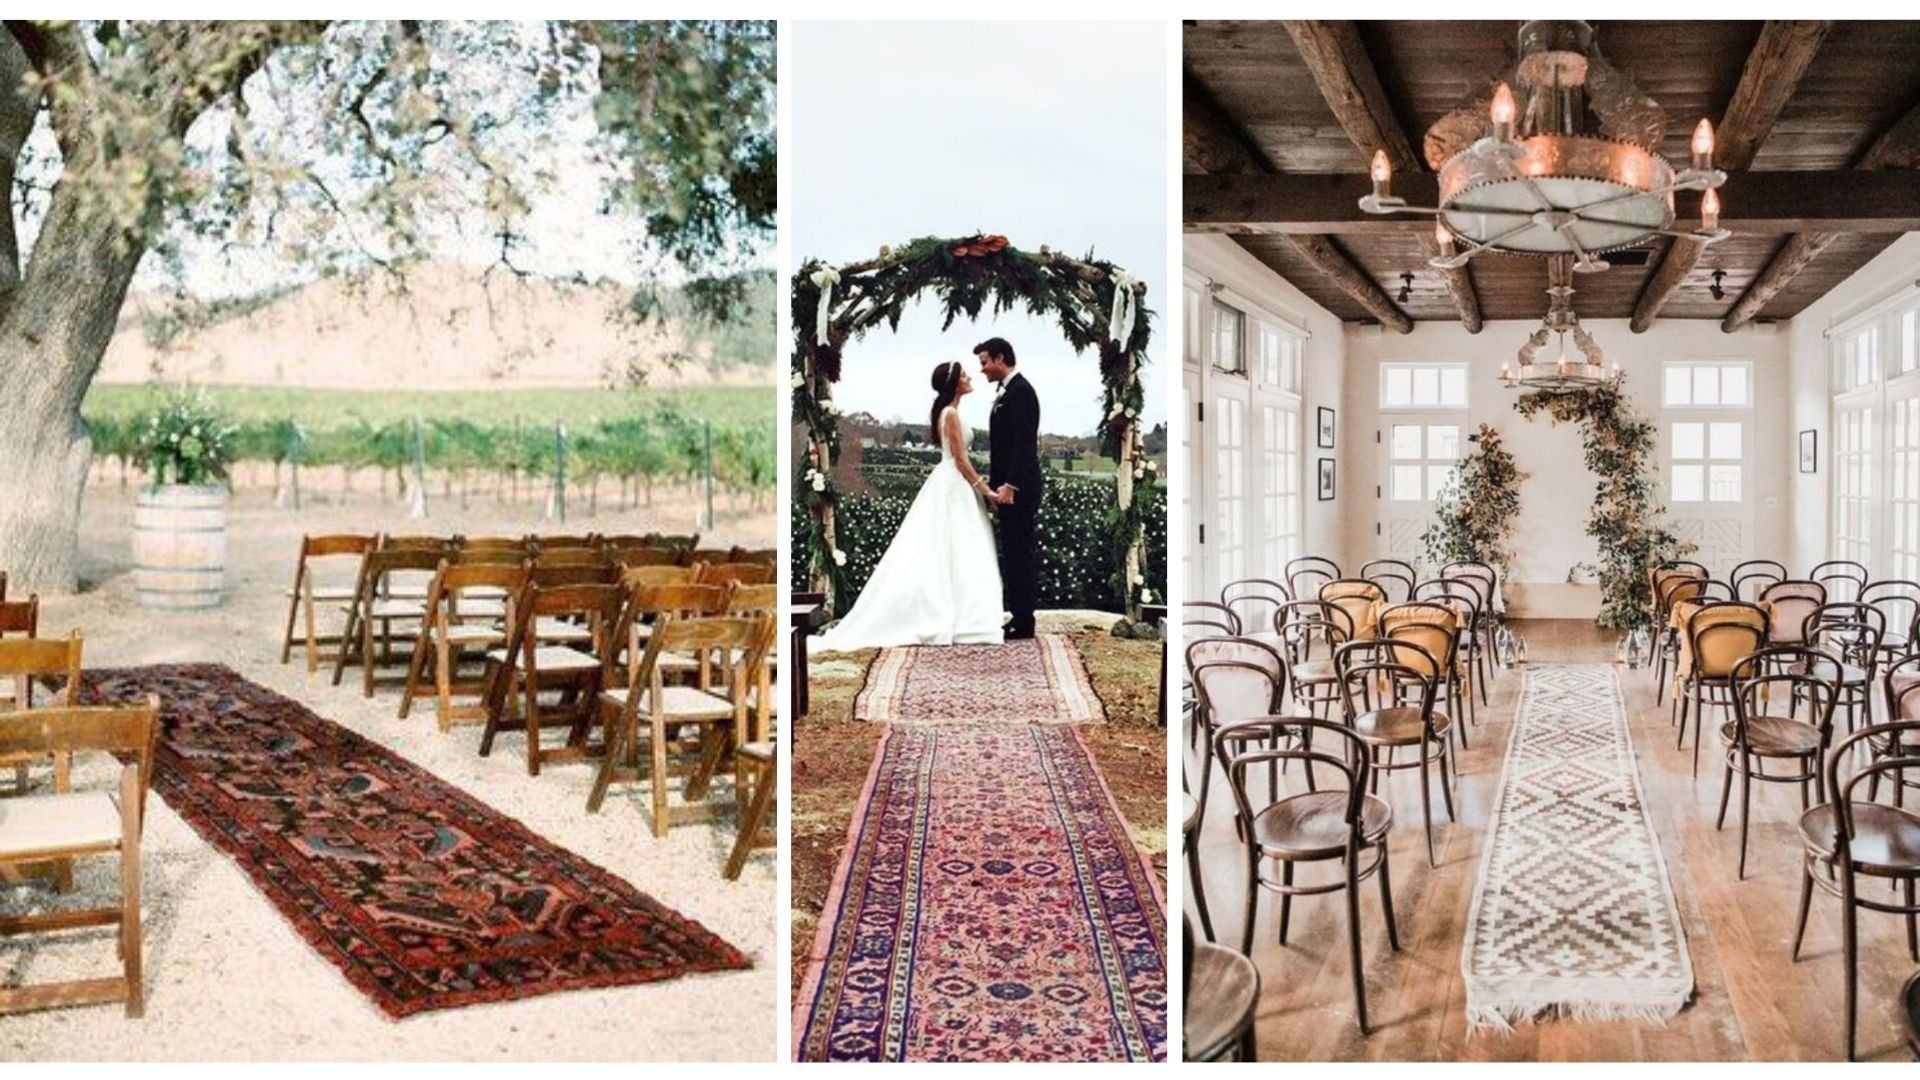 walk down the aisle on a persian runner